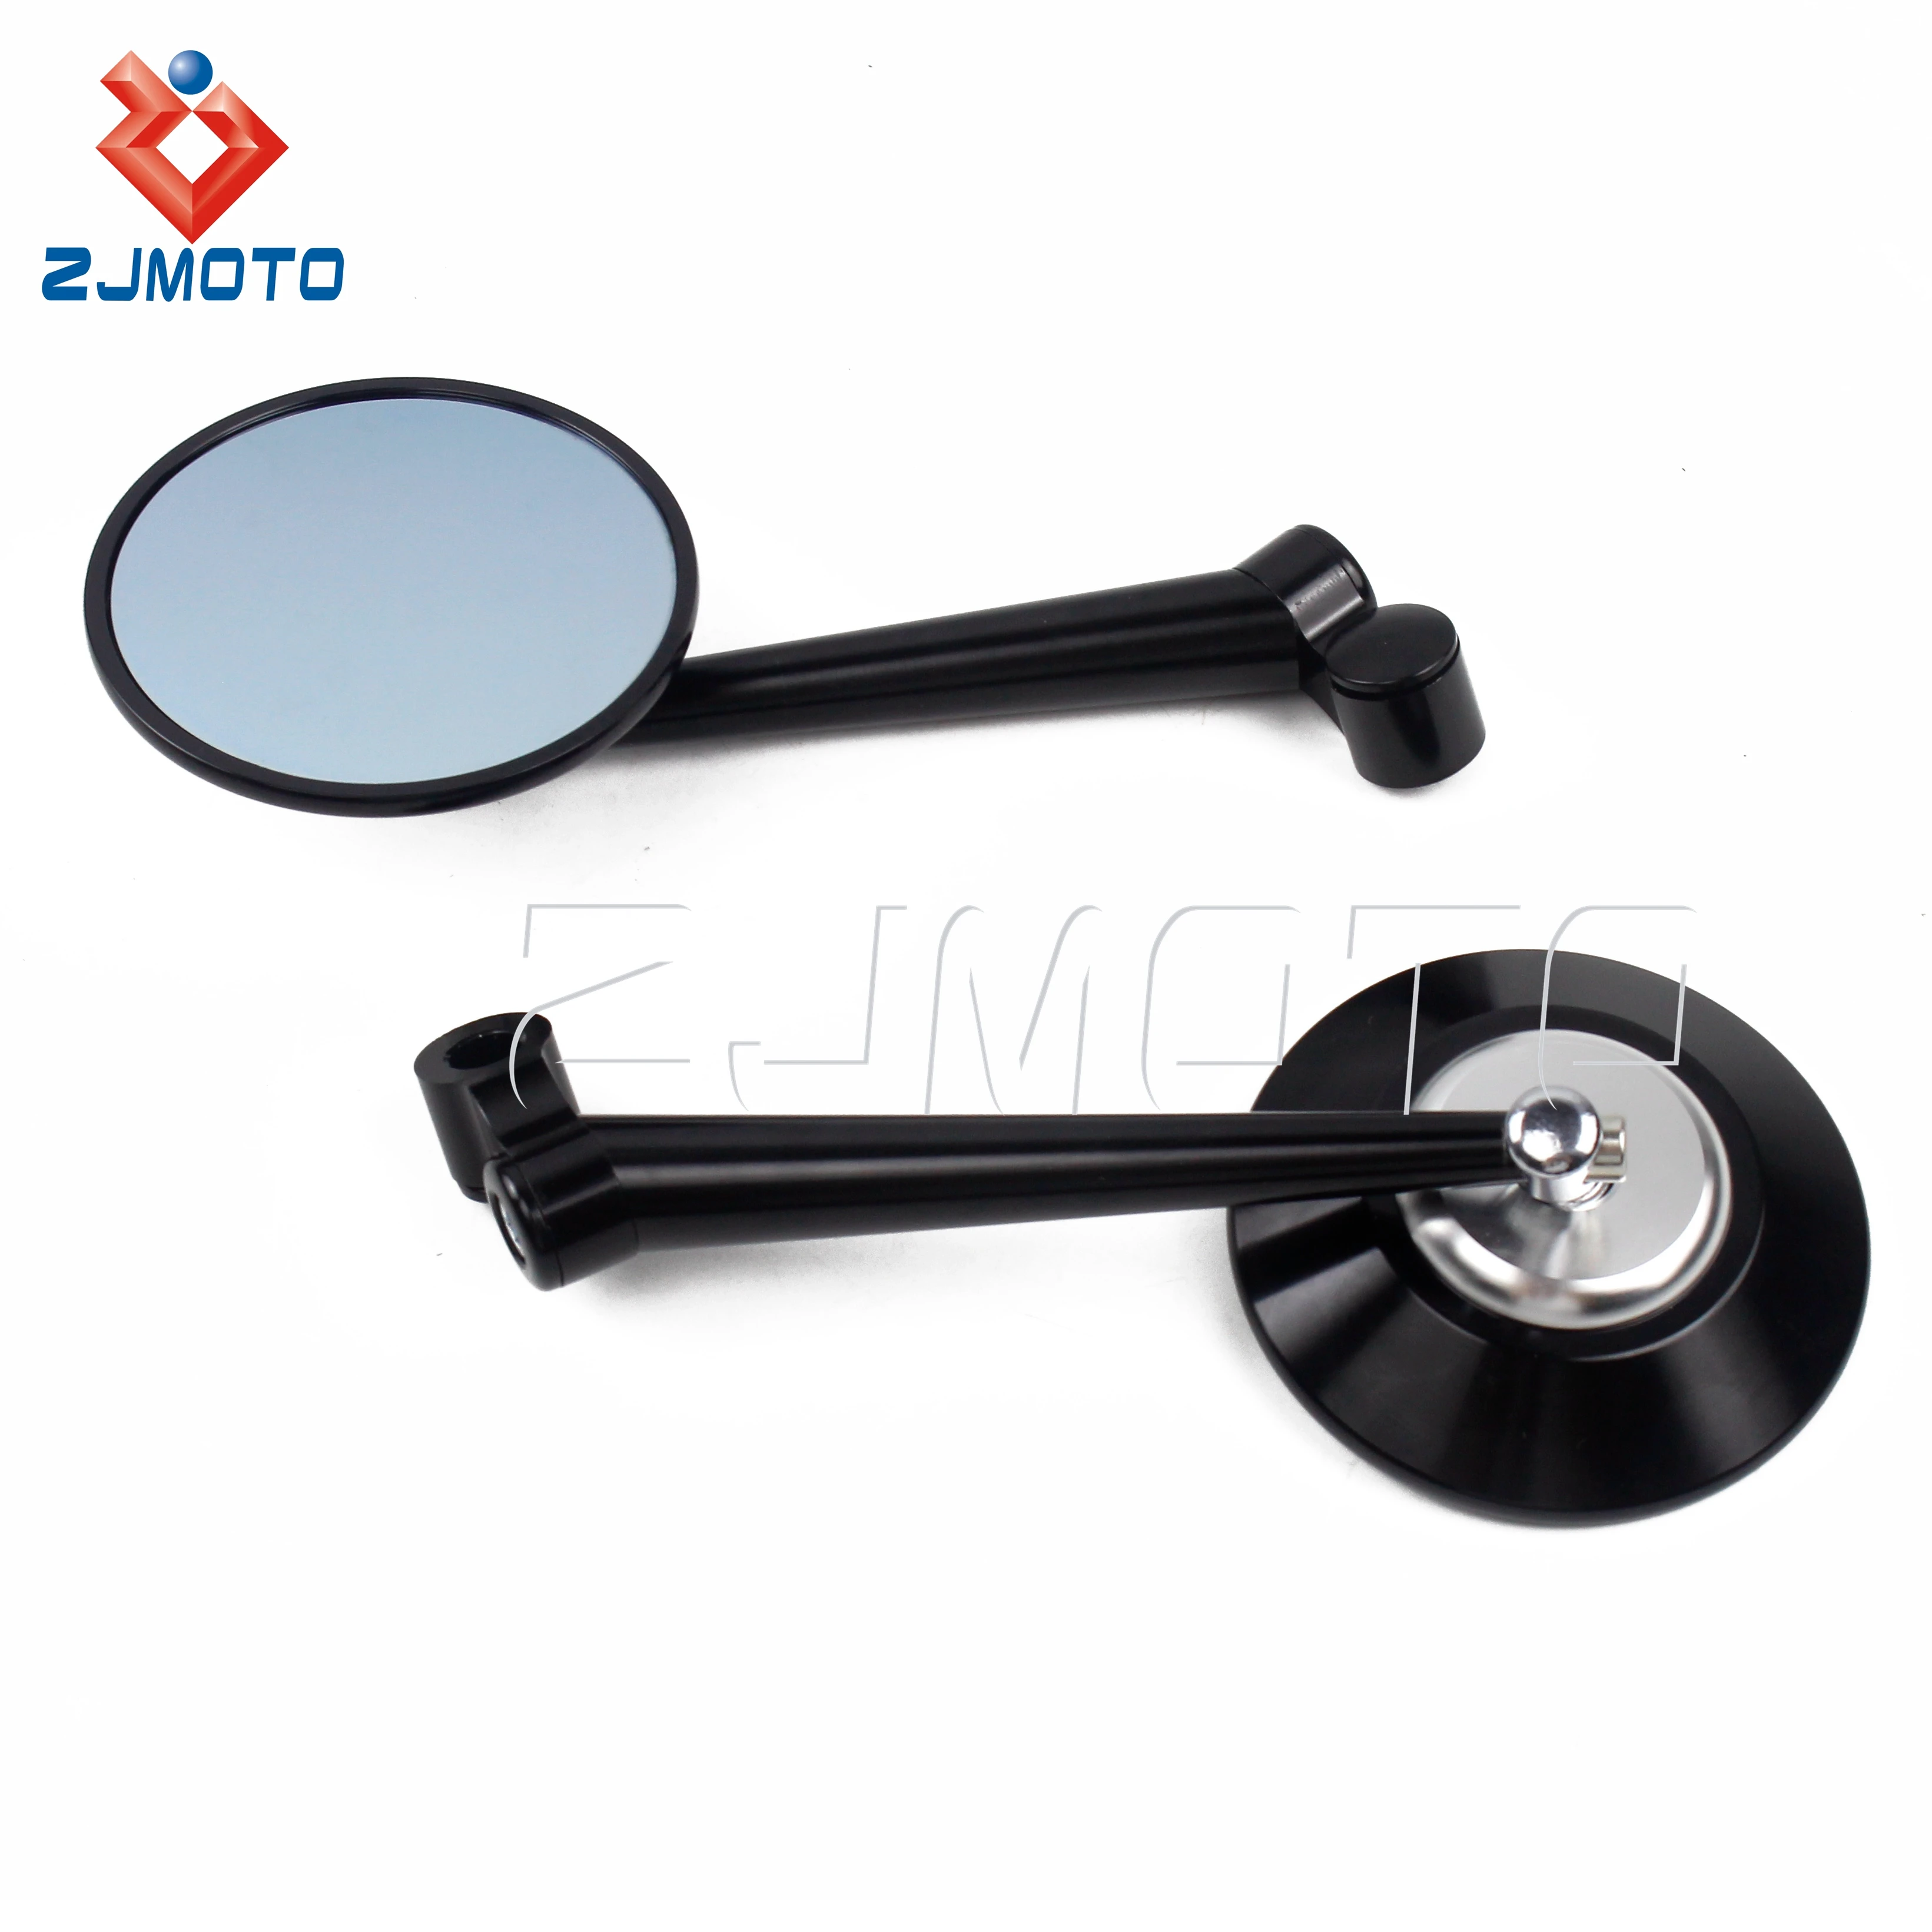 
Universal Motorcycle Mirrors Sport Bike Side Rearview Mirror For Most Streetbikes Scooter 